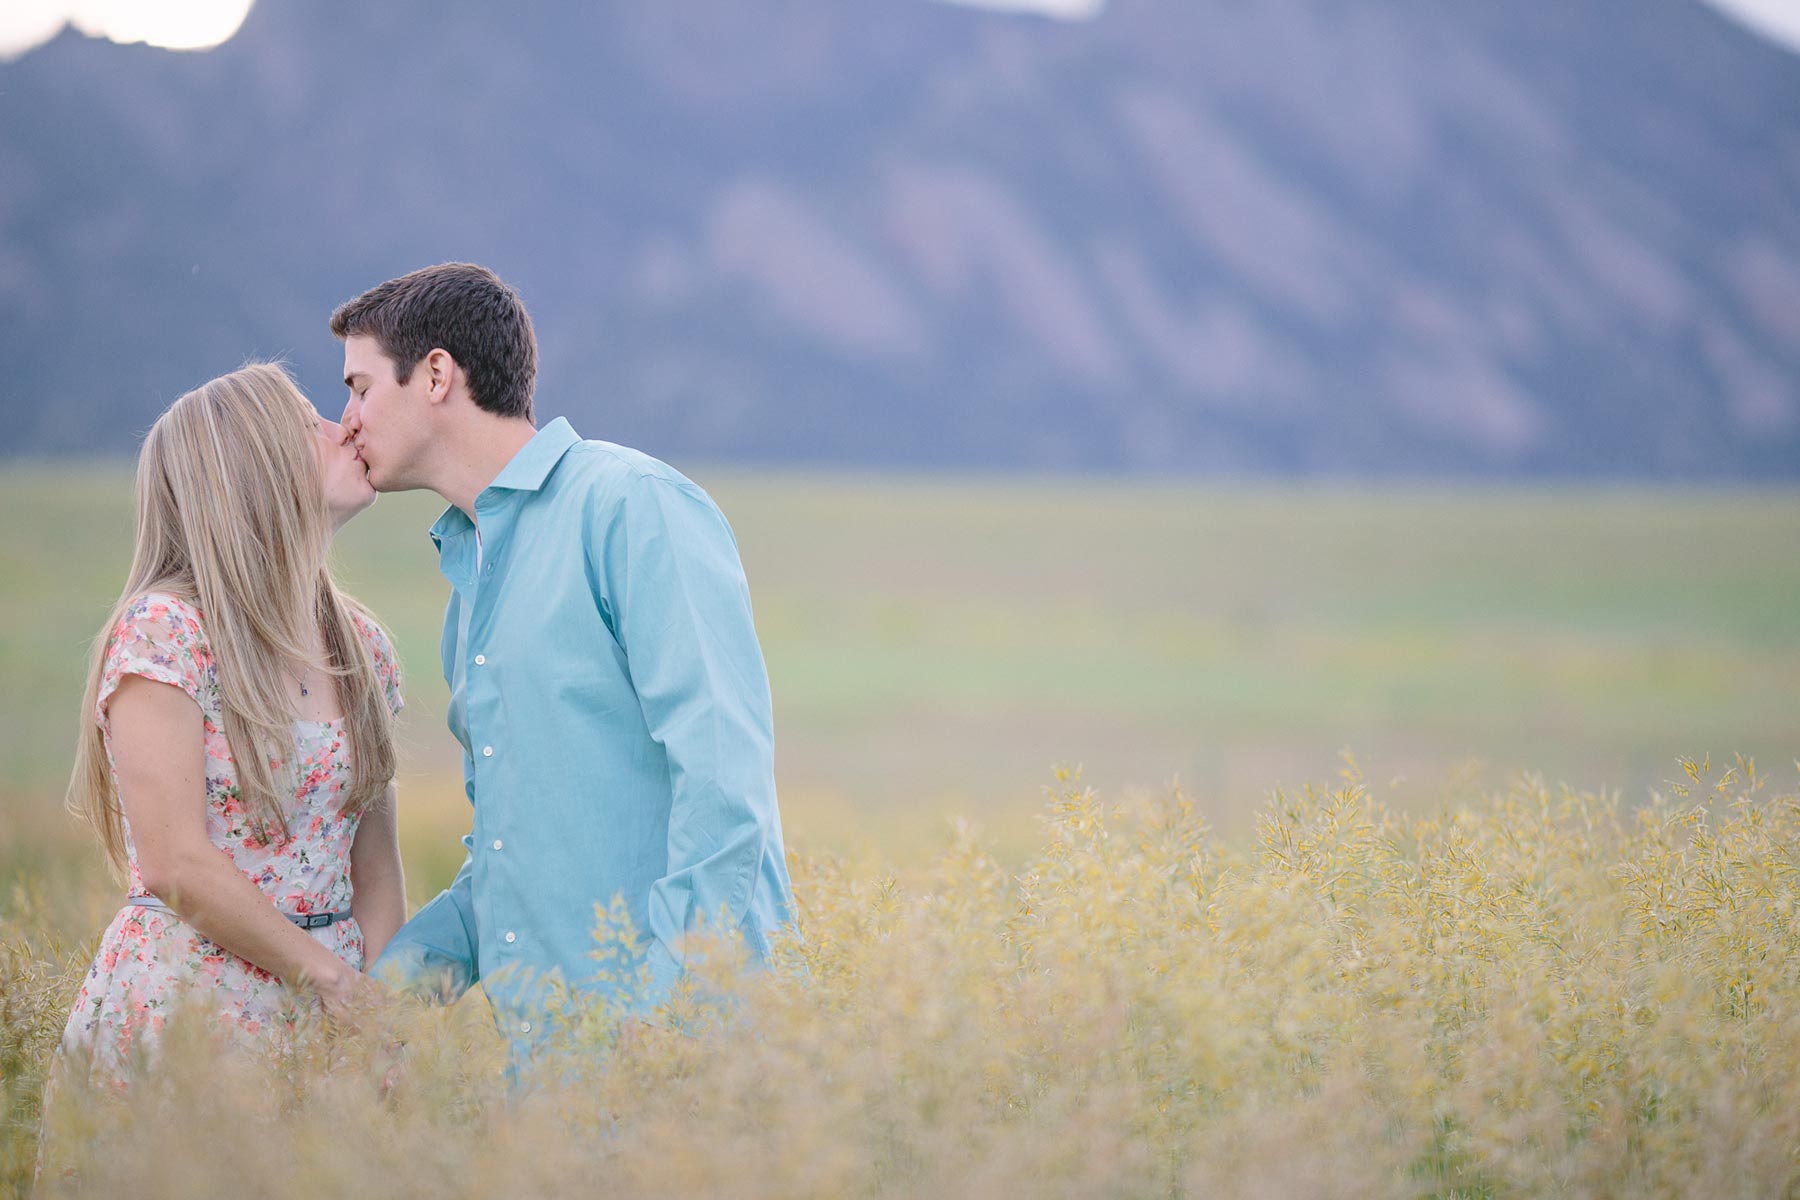 Irivng-Photography-Kerstyn-Korby-Colorado-Engagement-Photographers-009